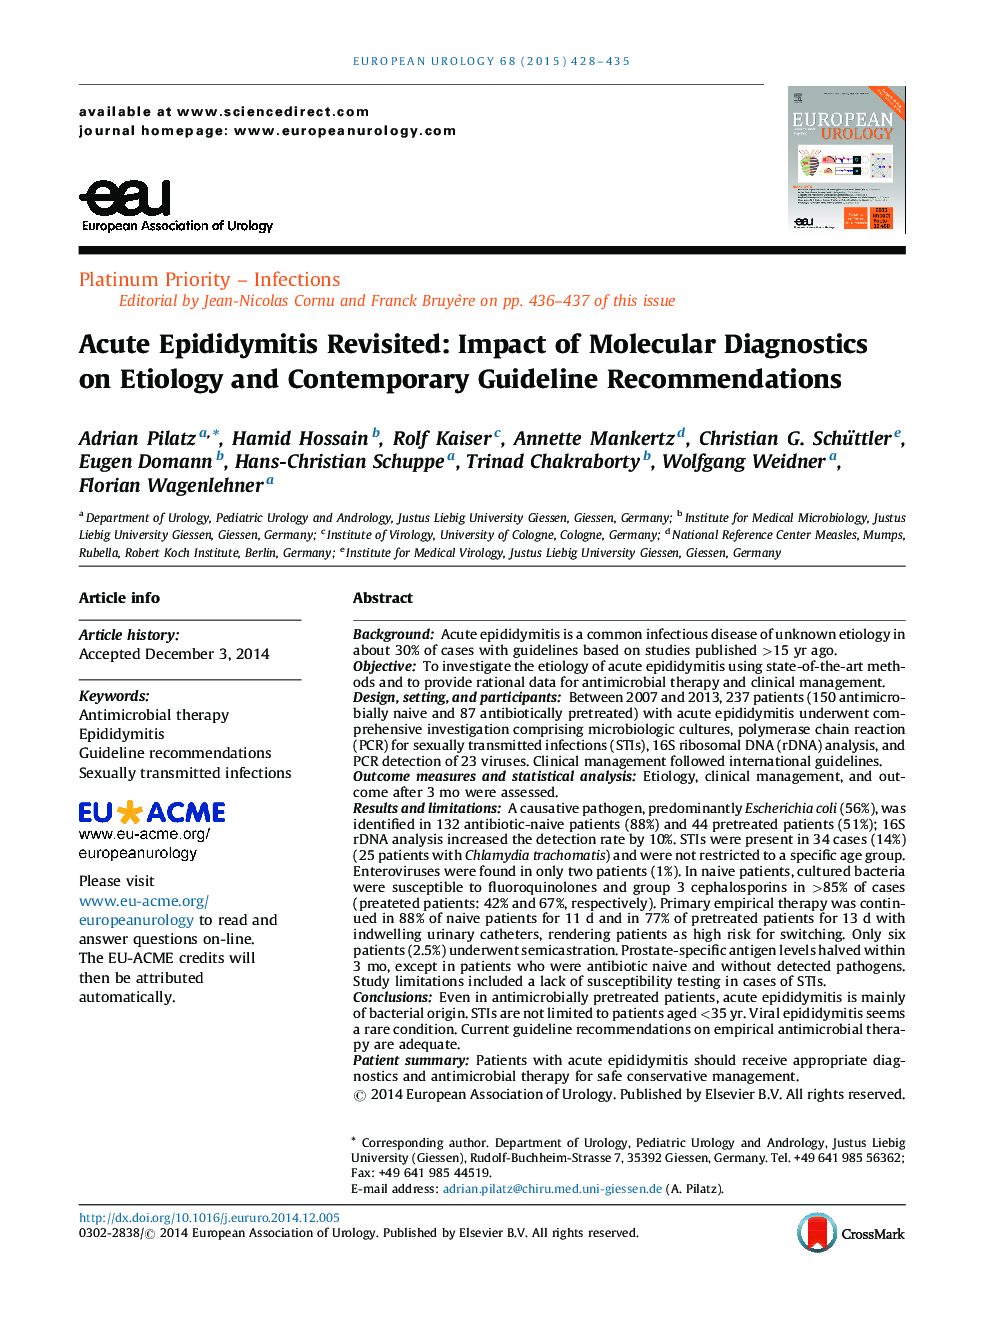 Acute Epididymitis Revisited: Impact of Molecular Diagnostics on Etiology and Contemporary Guideline Recommendations